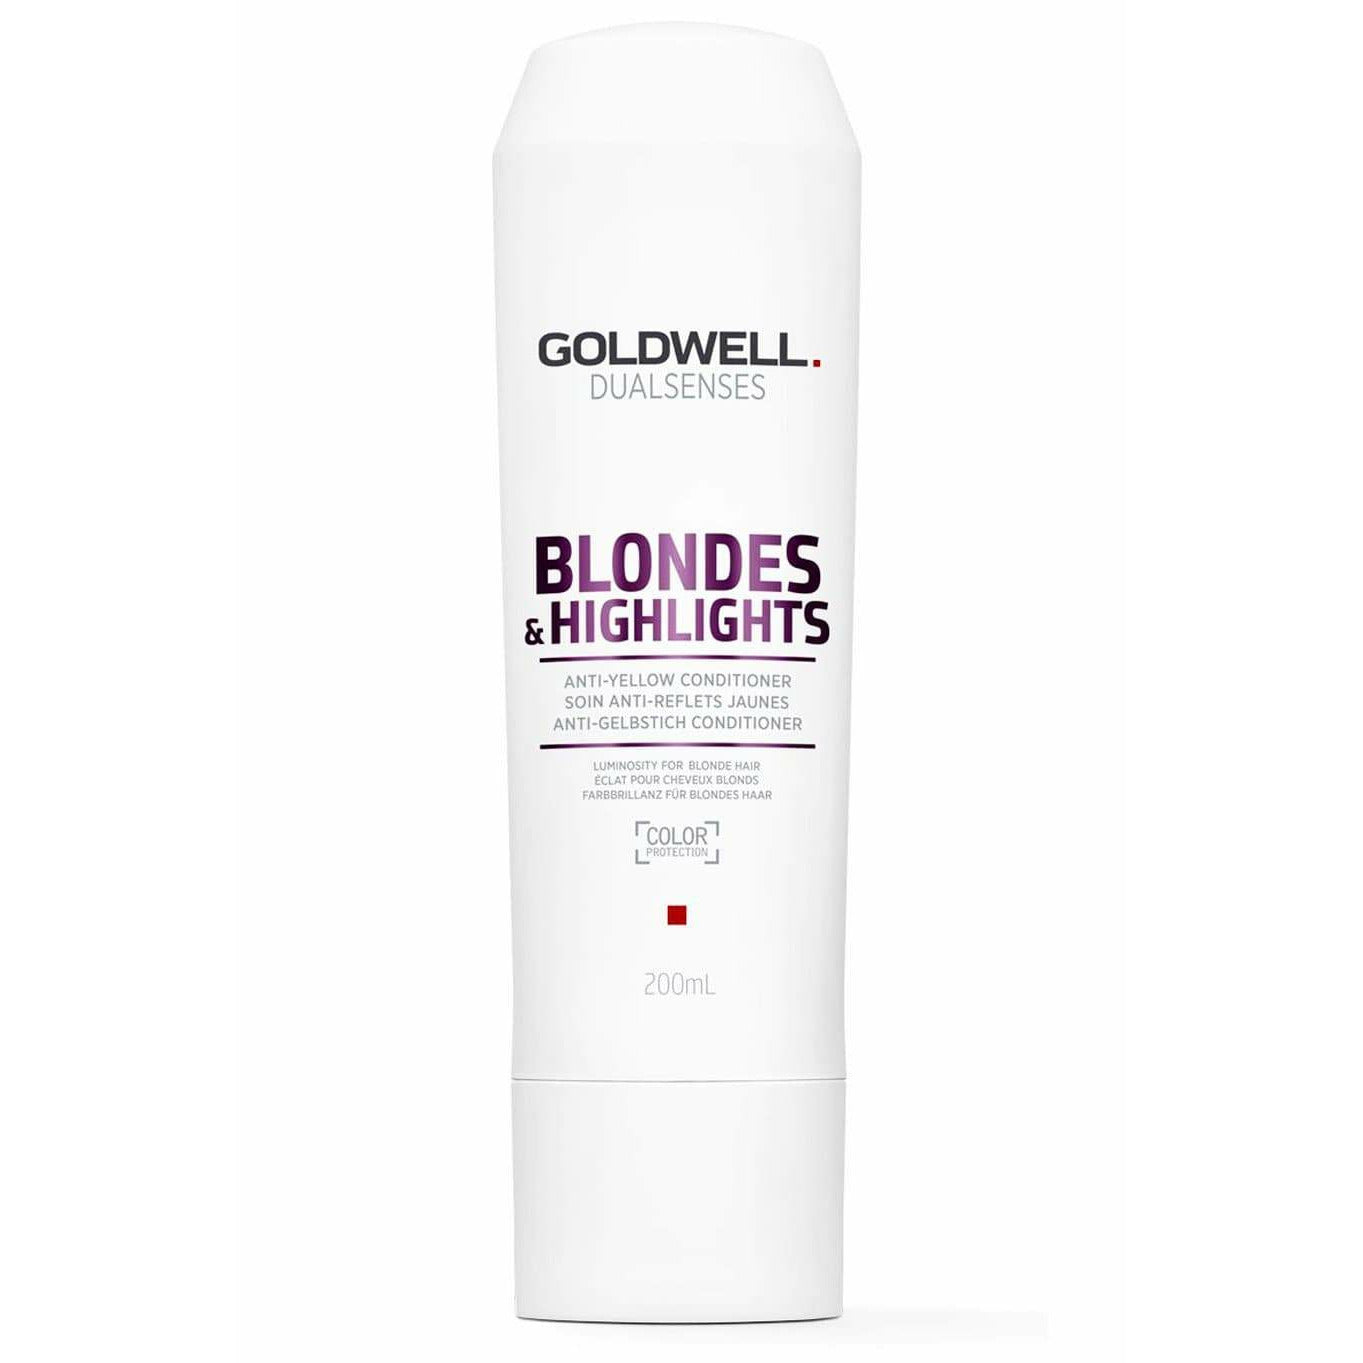 Goldwell Blondes Anti-Yellow Conditioner